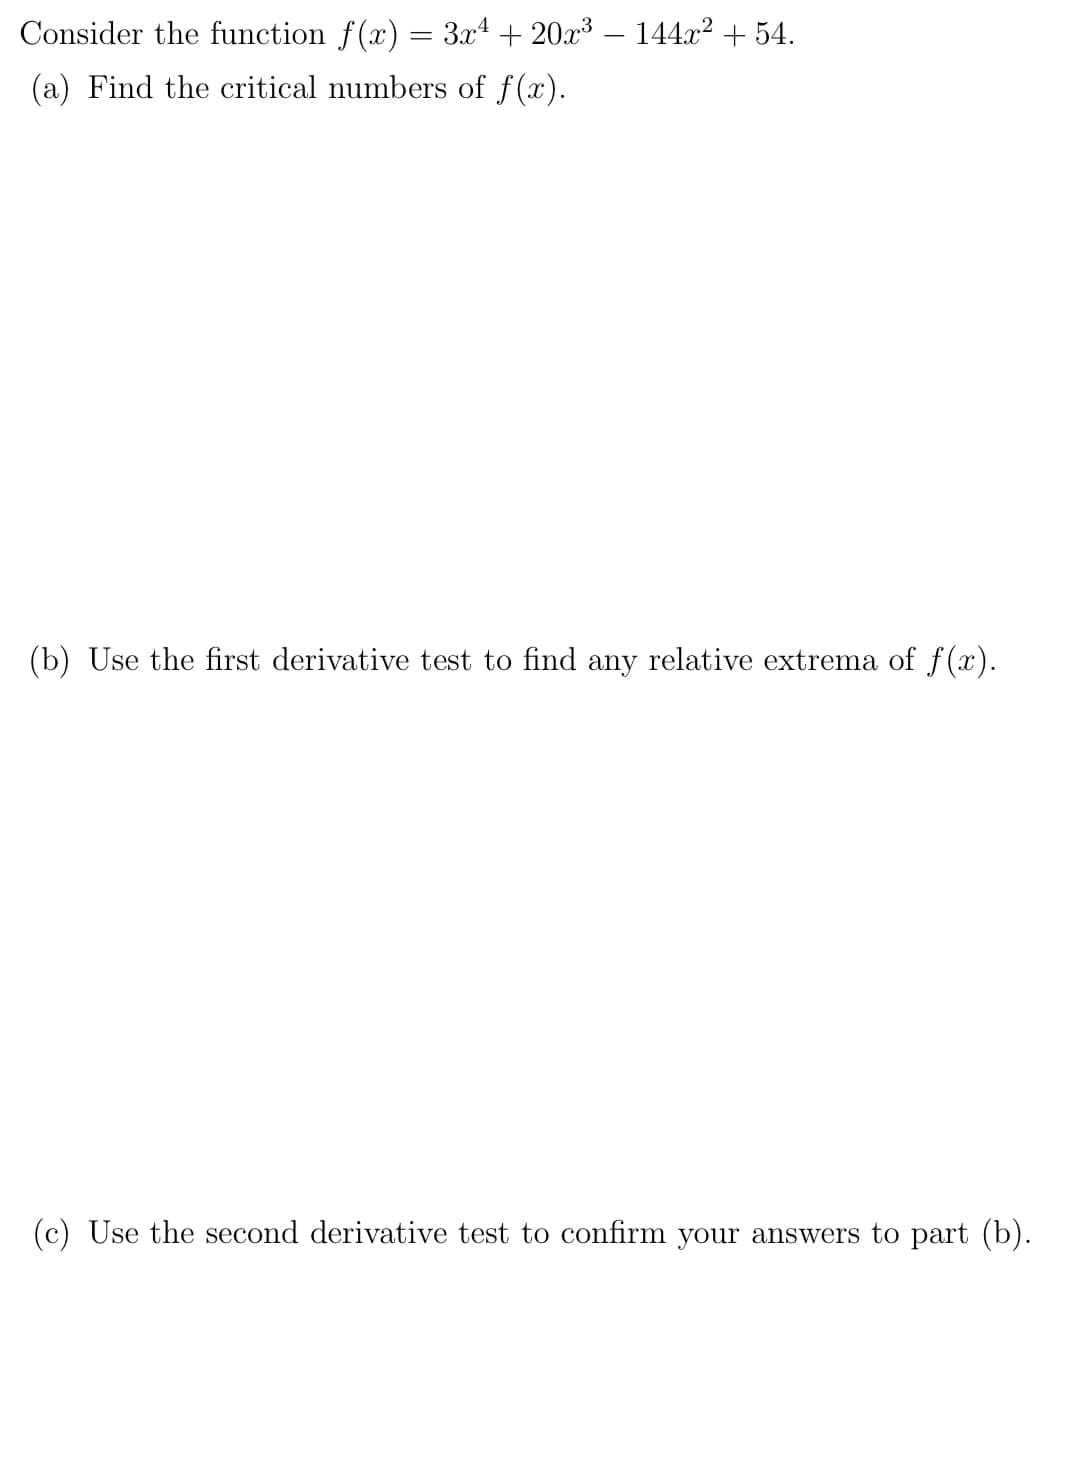 Consider the function f(x) = 3x4 + 20x³ – 144x? + 54.
(a) Find the critical numbers of f(x).
(b) Use the first derivative test to find any relative extrema of f(x).
(c) Use the second derivative test to confirm your answers to part (b).
